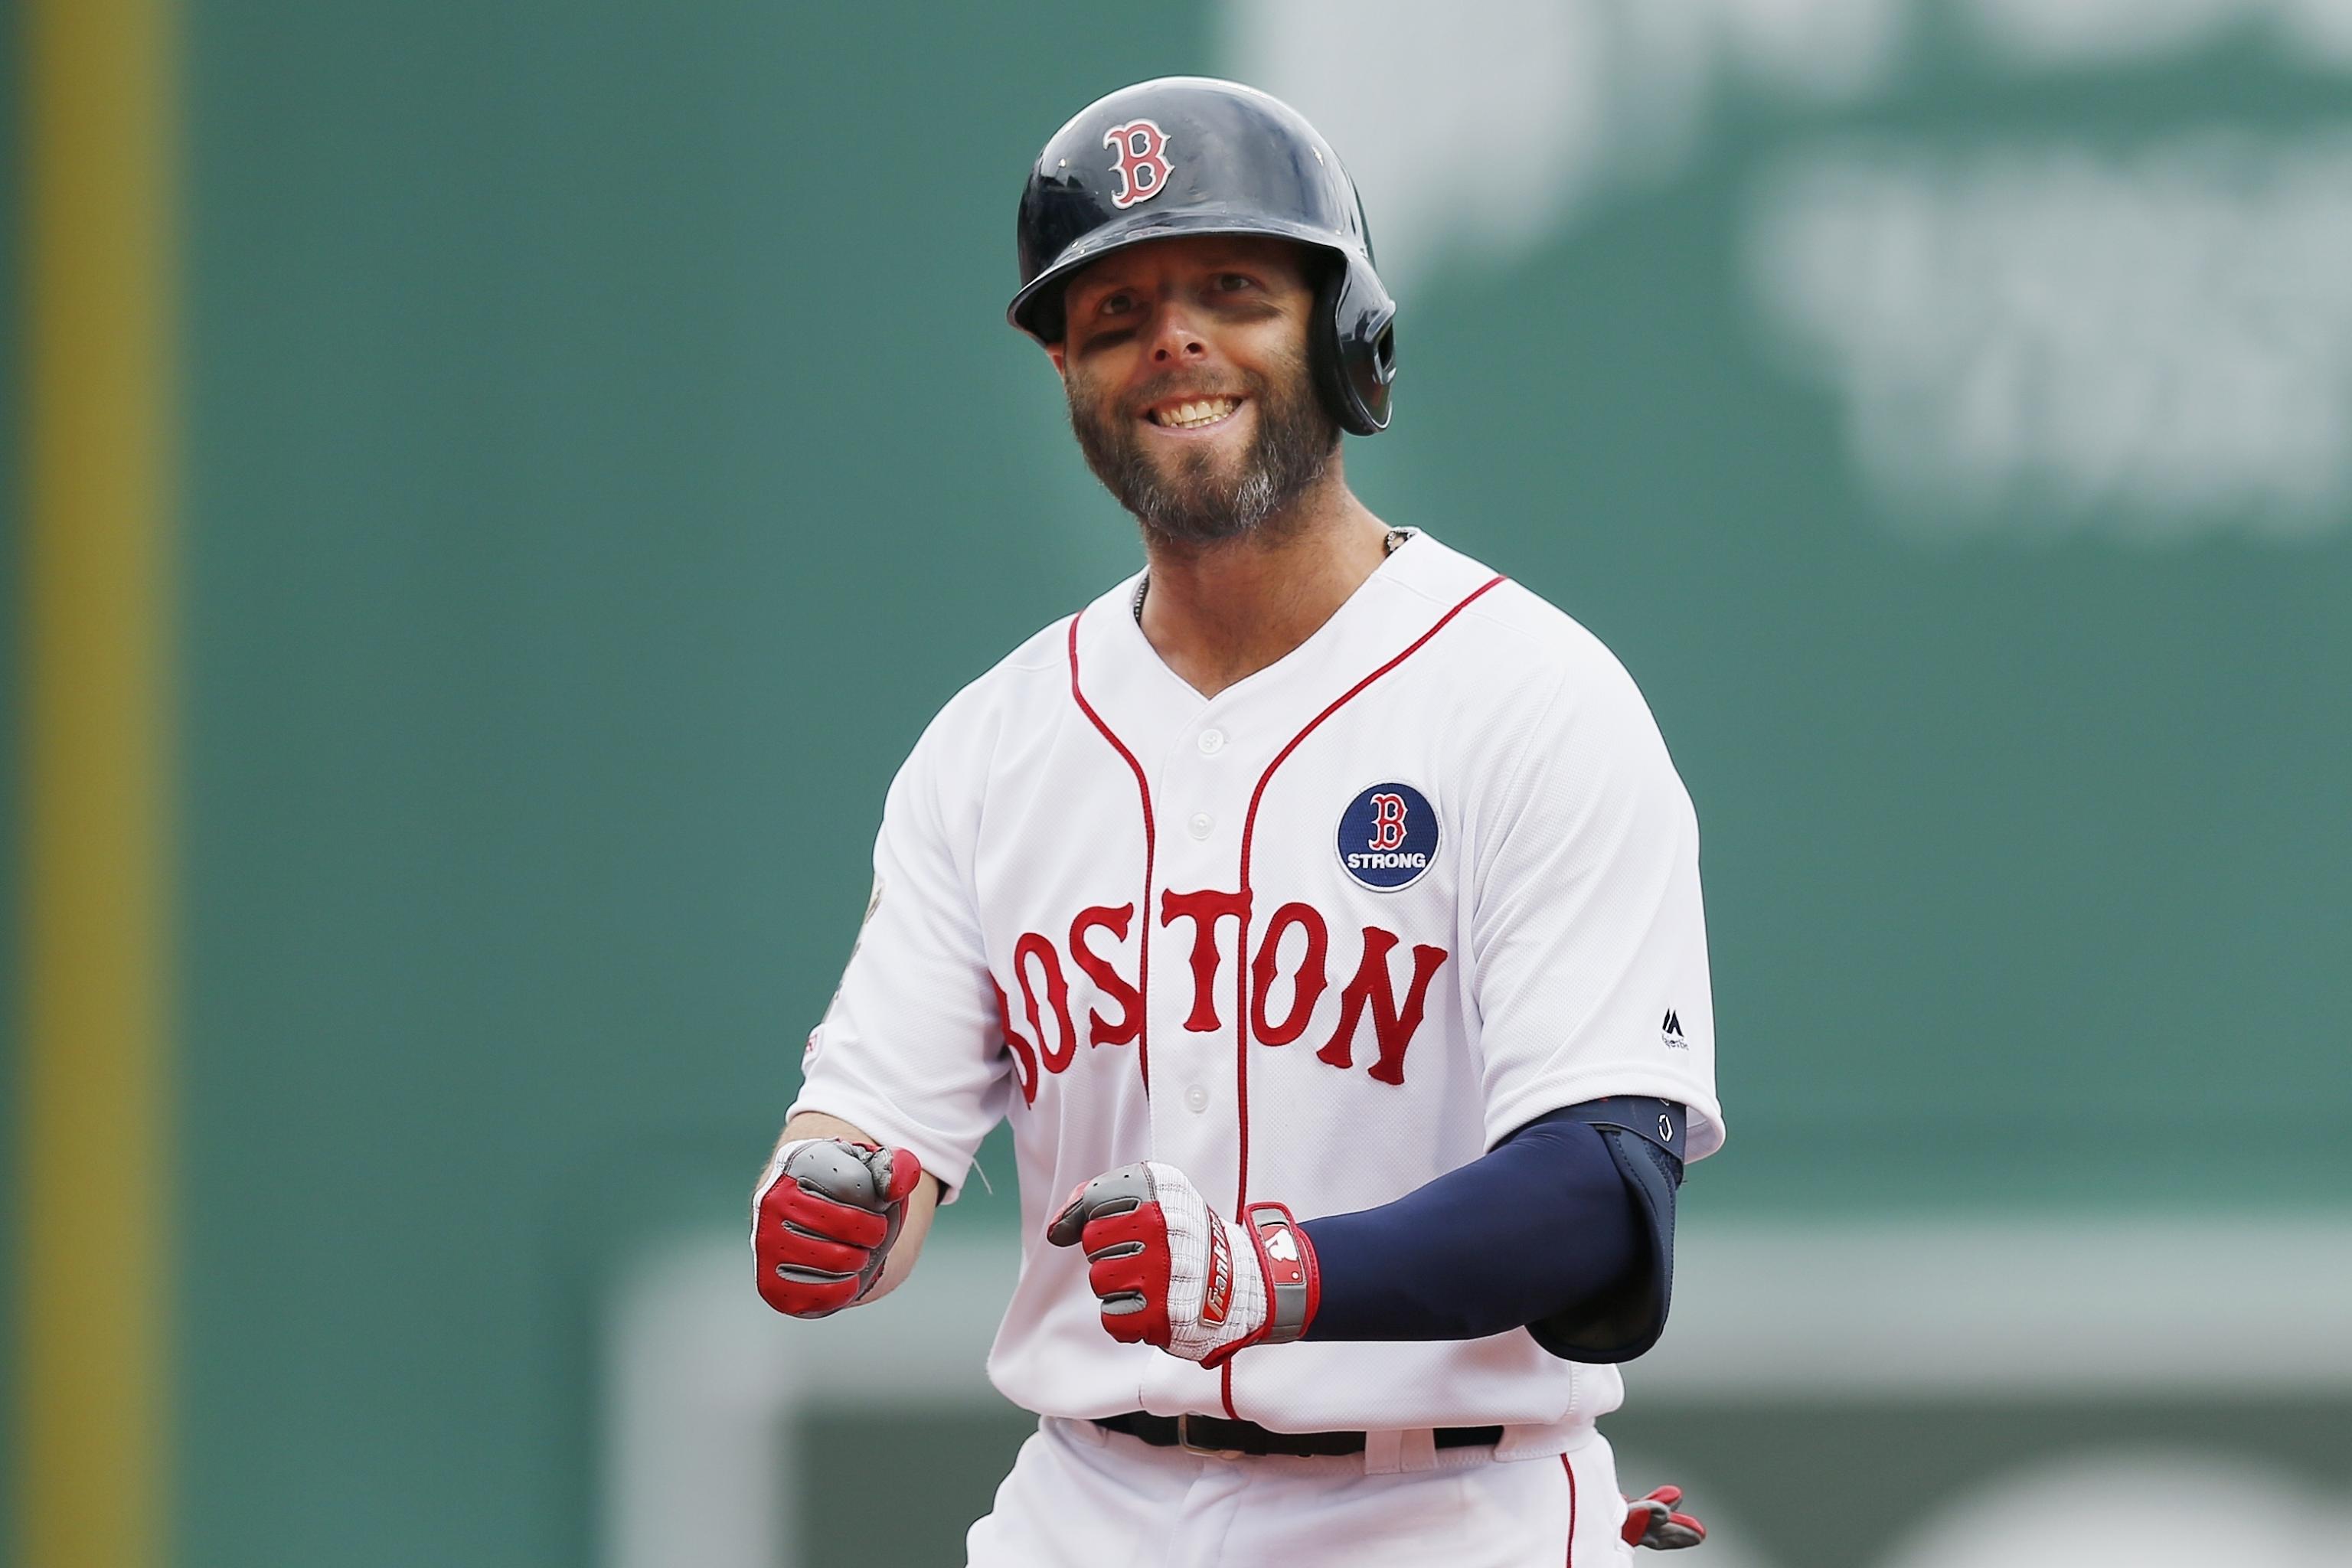 Dustin Pedroia appears to sustain injury in second base collision